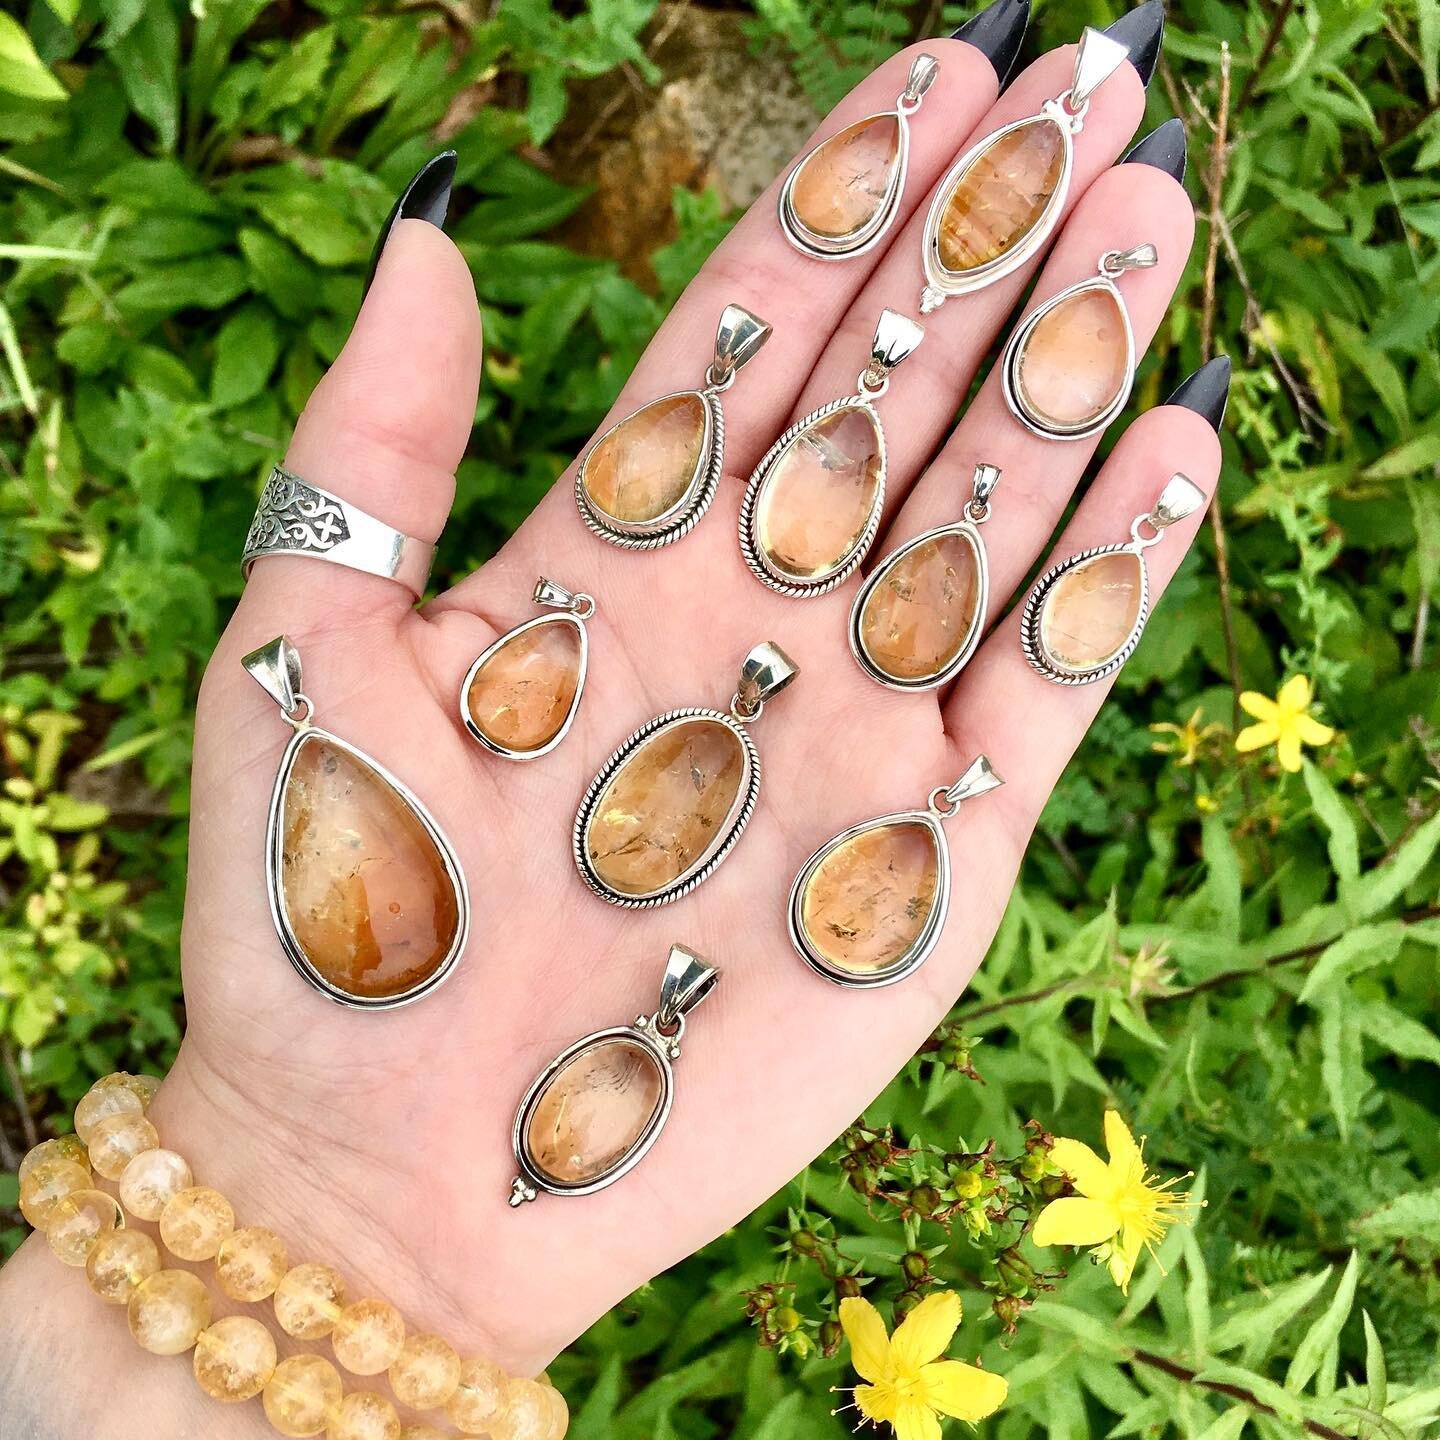 ☀️Tag a friend who could use some sunny citrine to brighten their day! 

Citrine is known for its uplifting affect on mood and ability to shield against negativity 🌟

With one of these pendos you could be &ldquo;mmm blockin&rsquo; out the haters&rdq